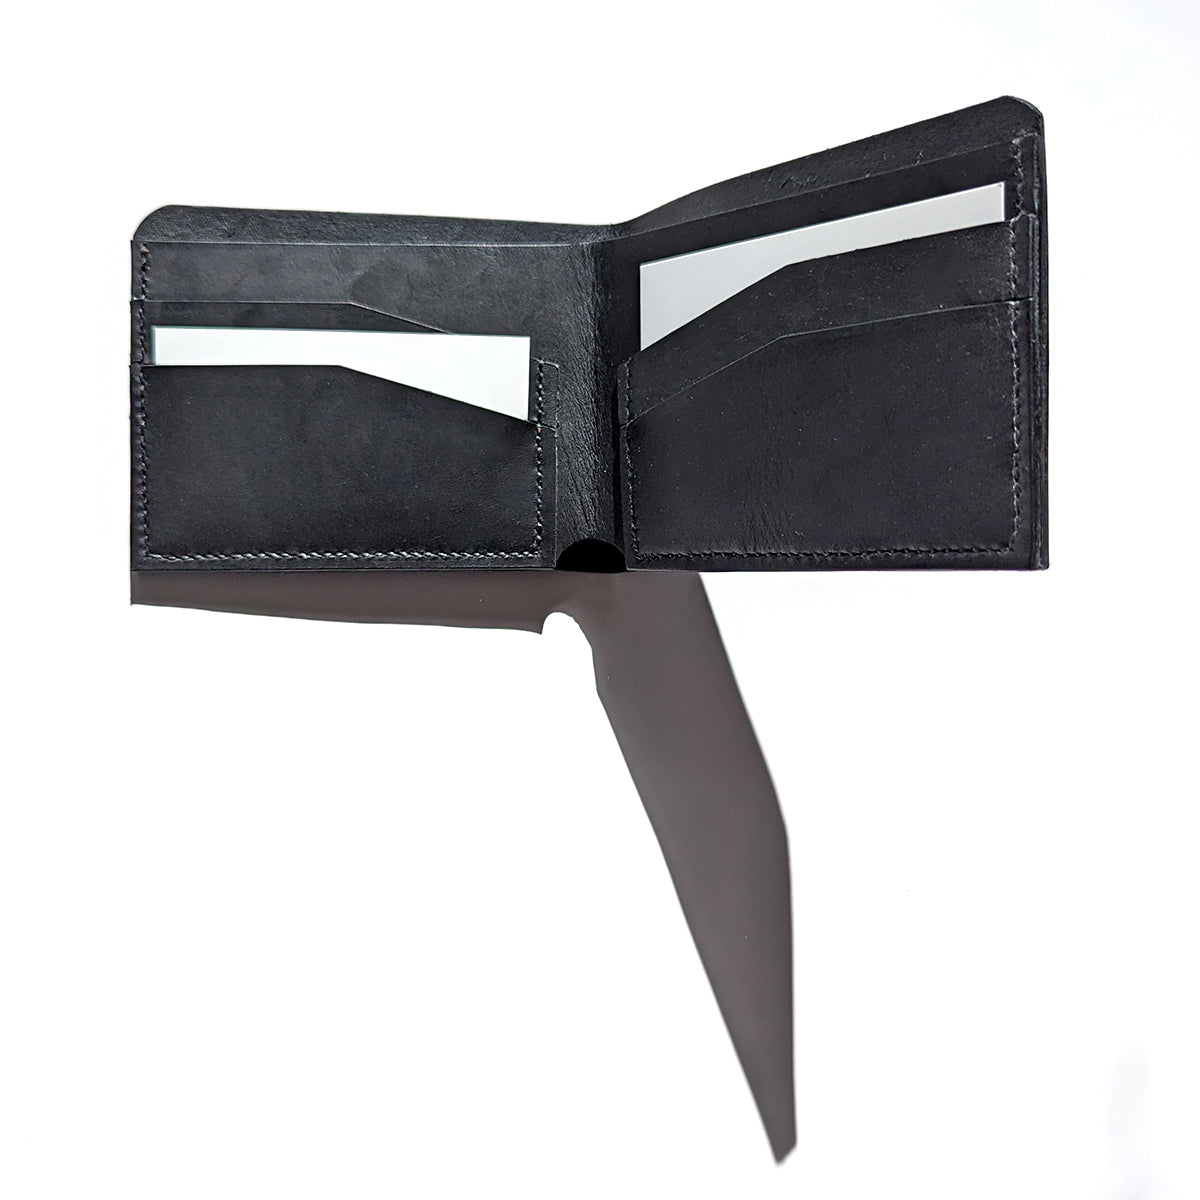 Leather Billfold with 5 pockets, handsewn